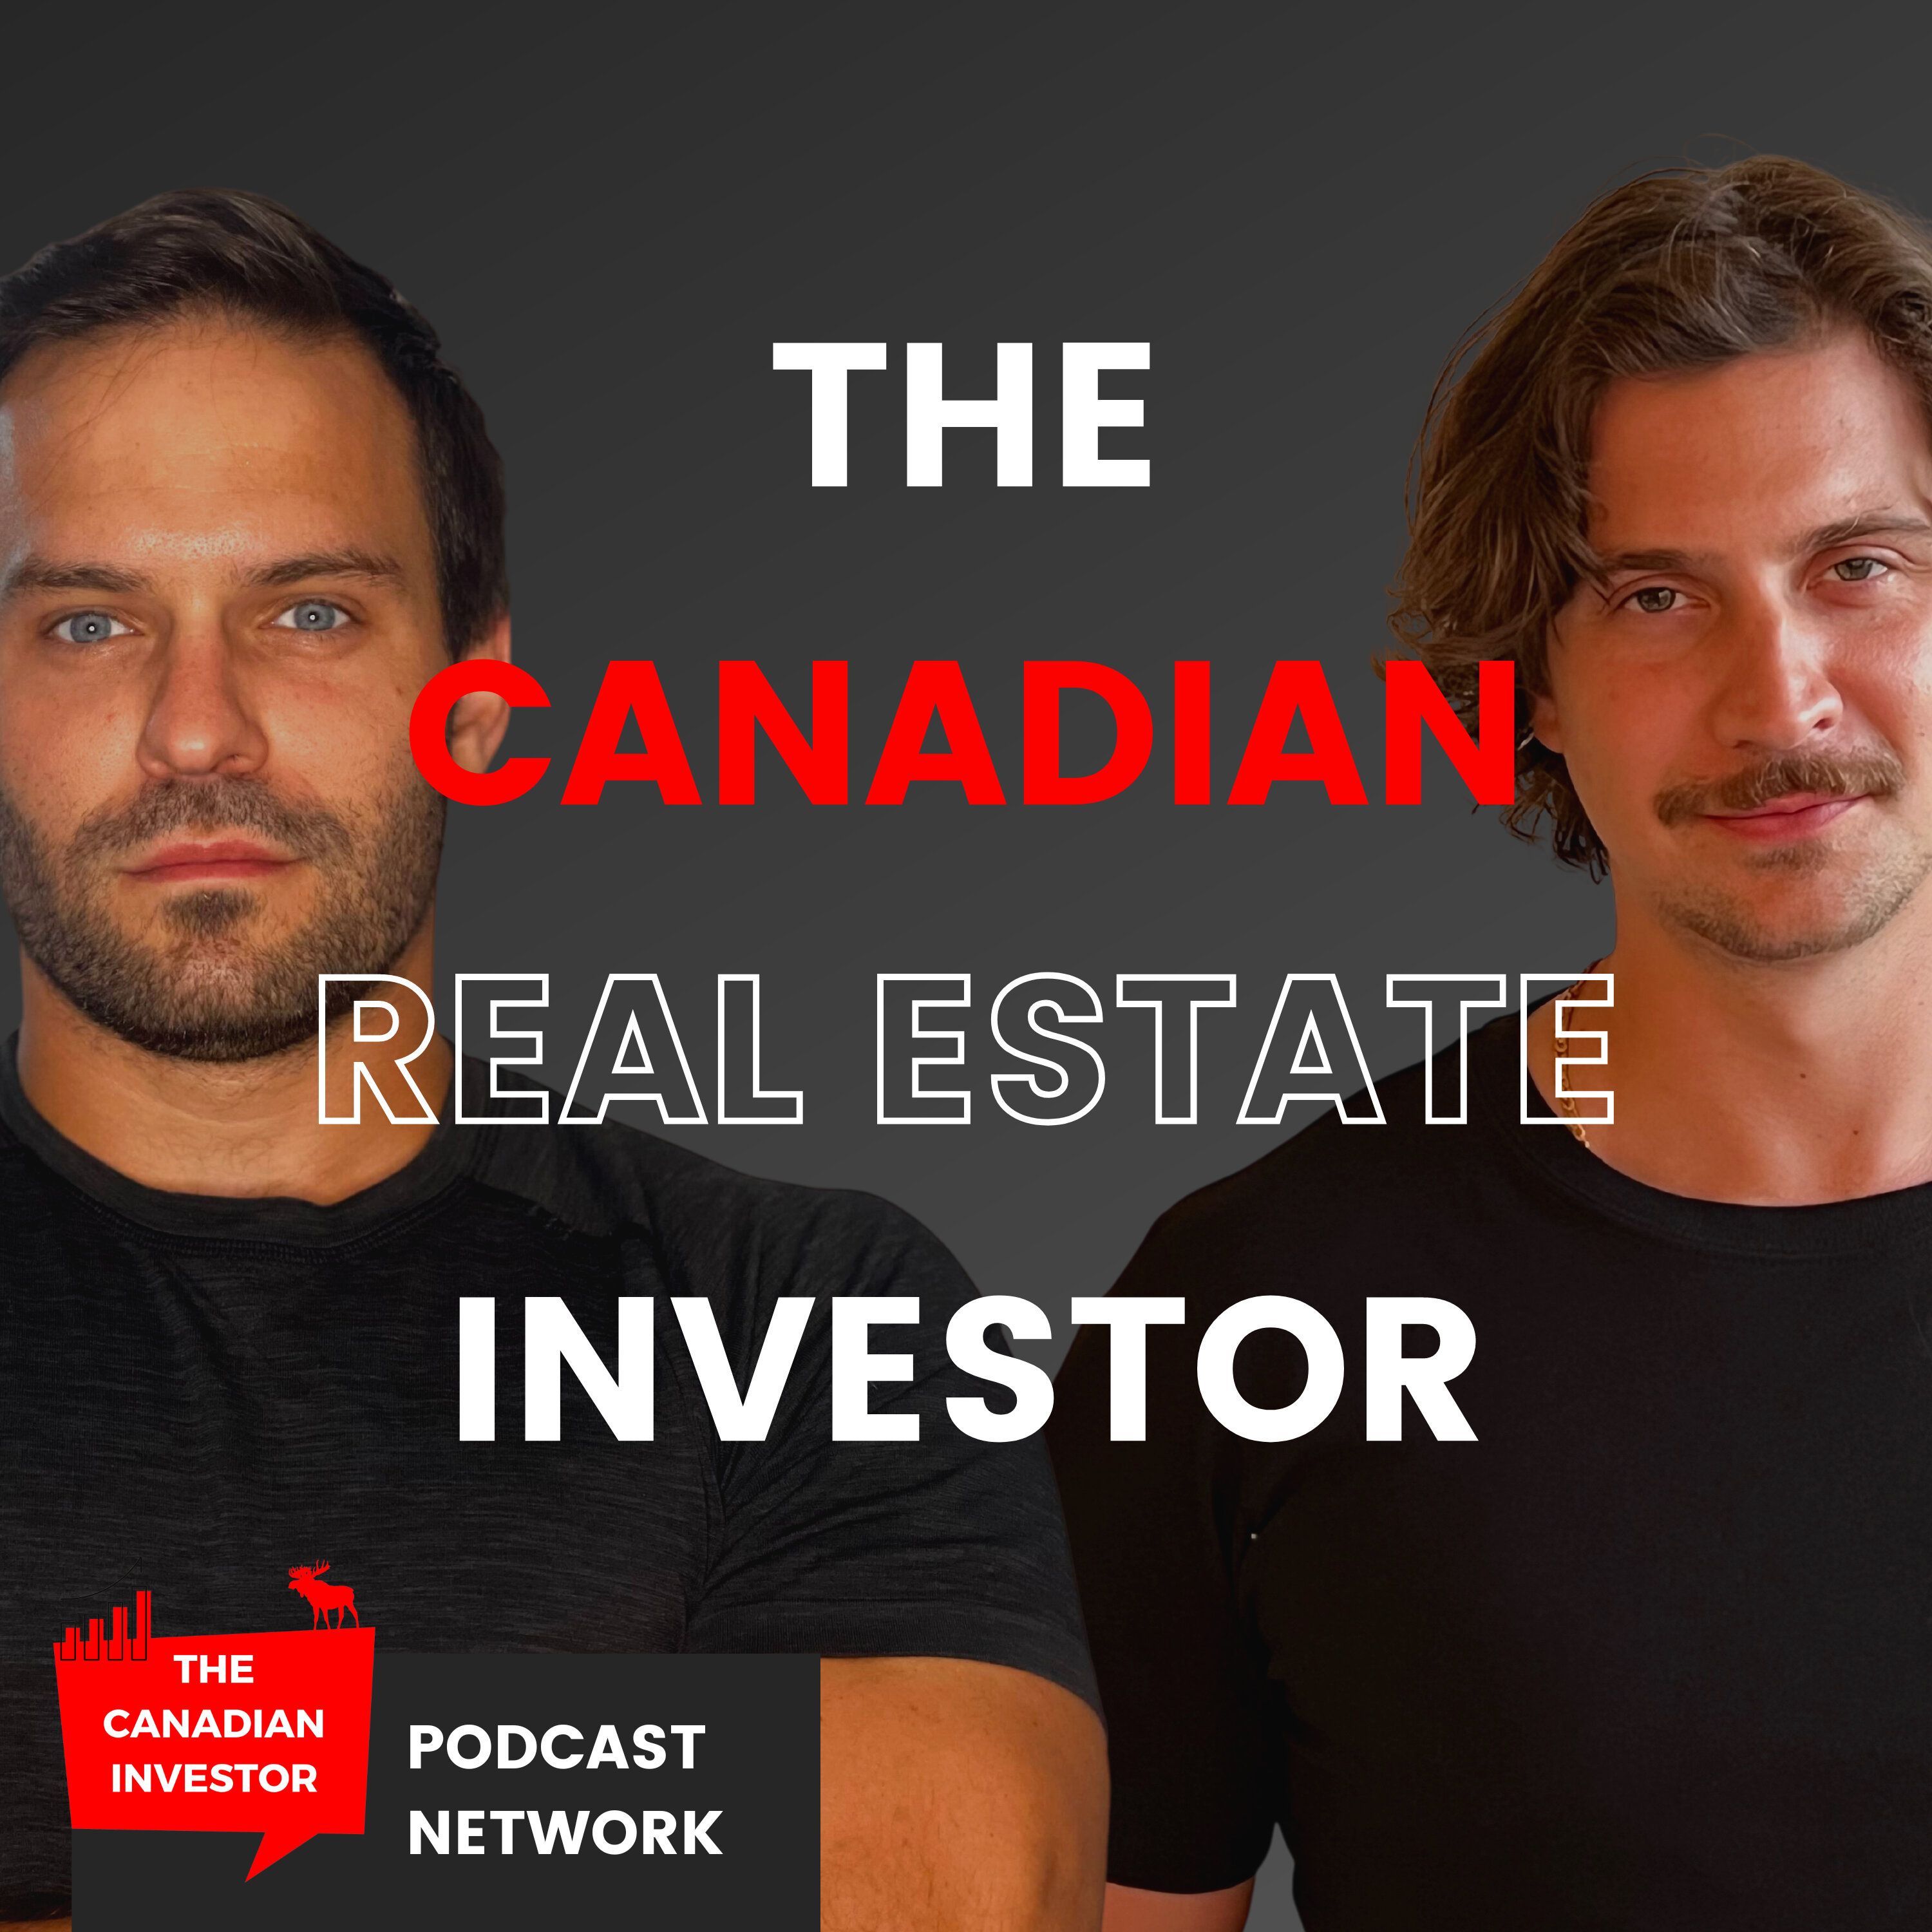 The Canadian Real Estate Investor Podcast